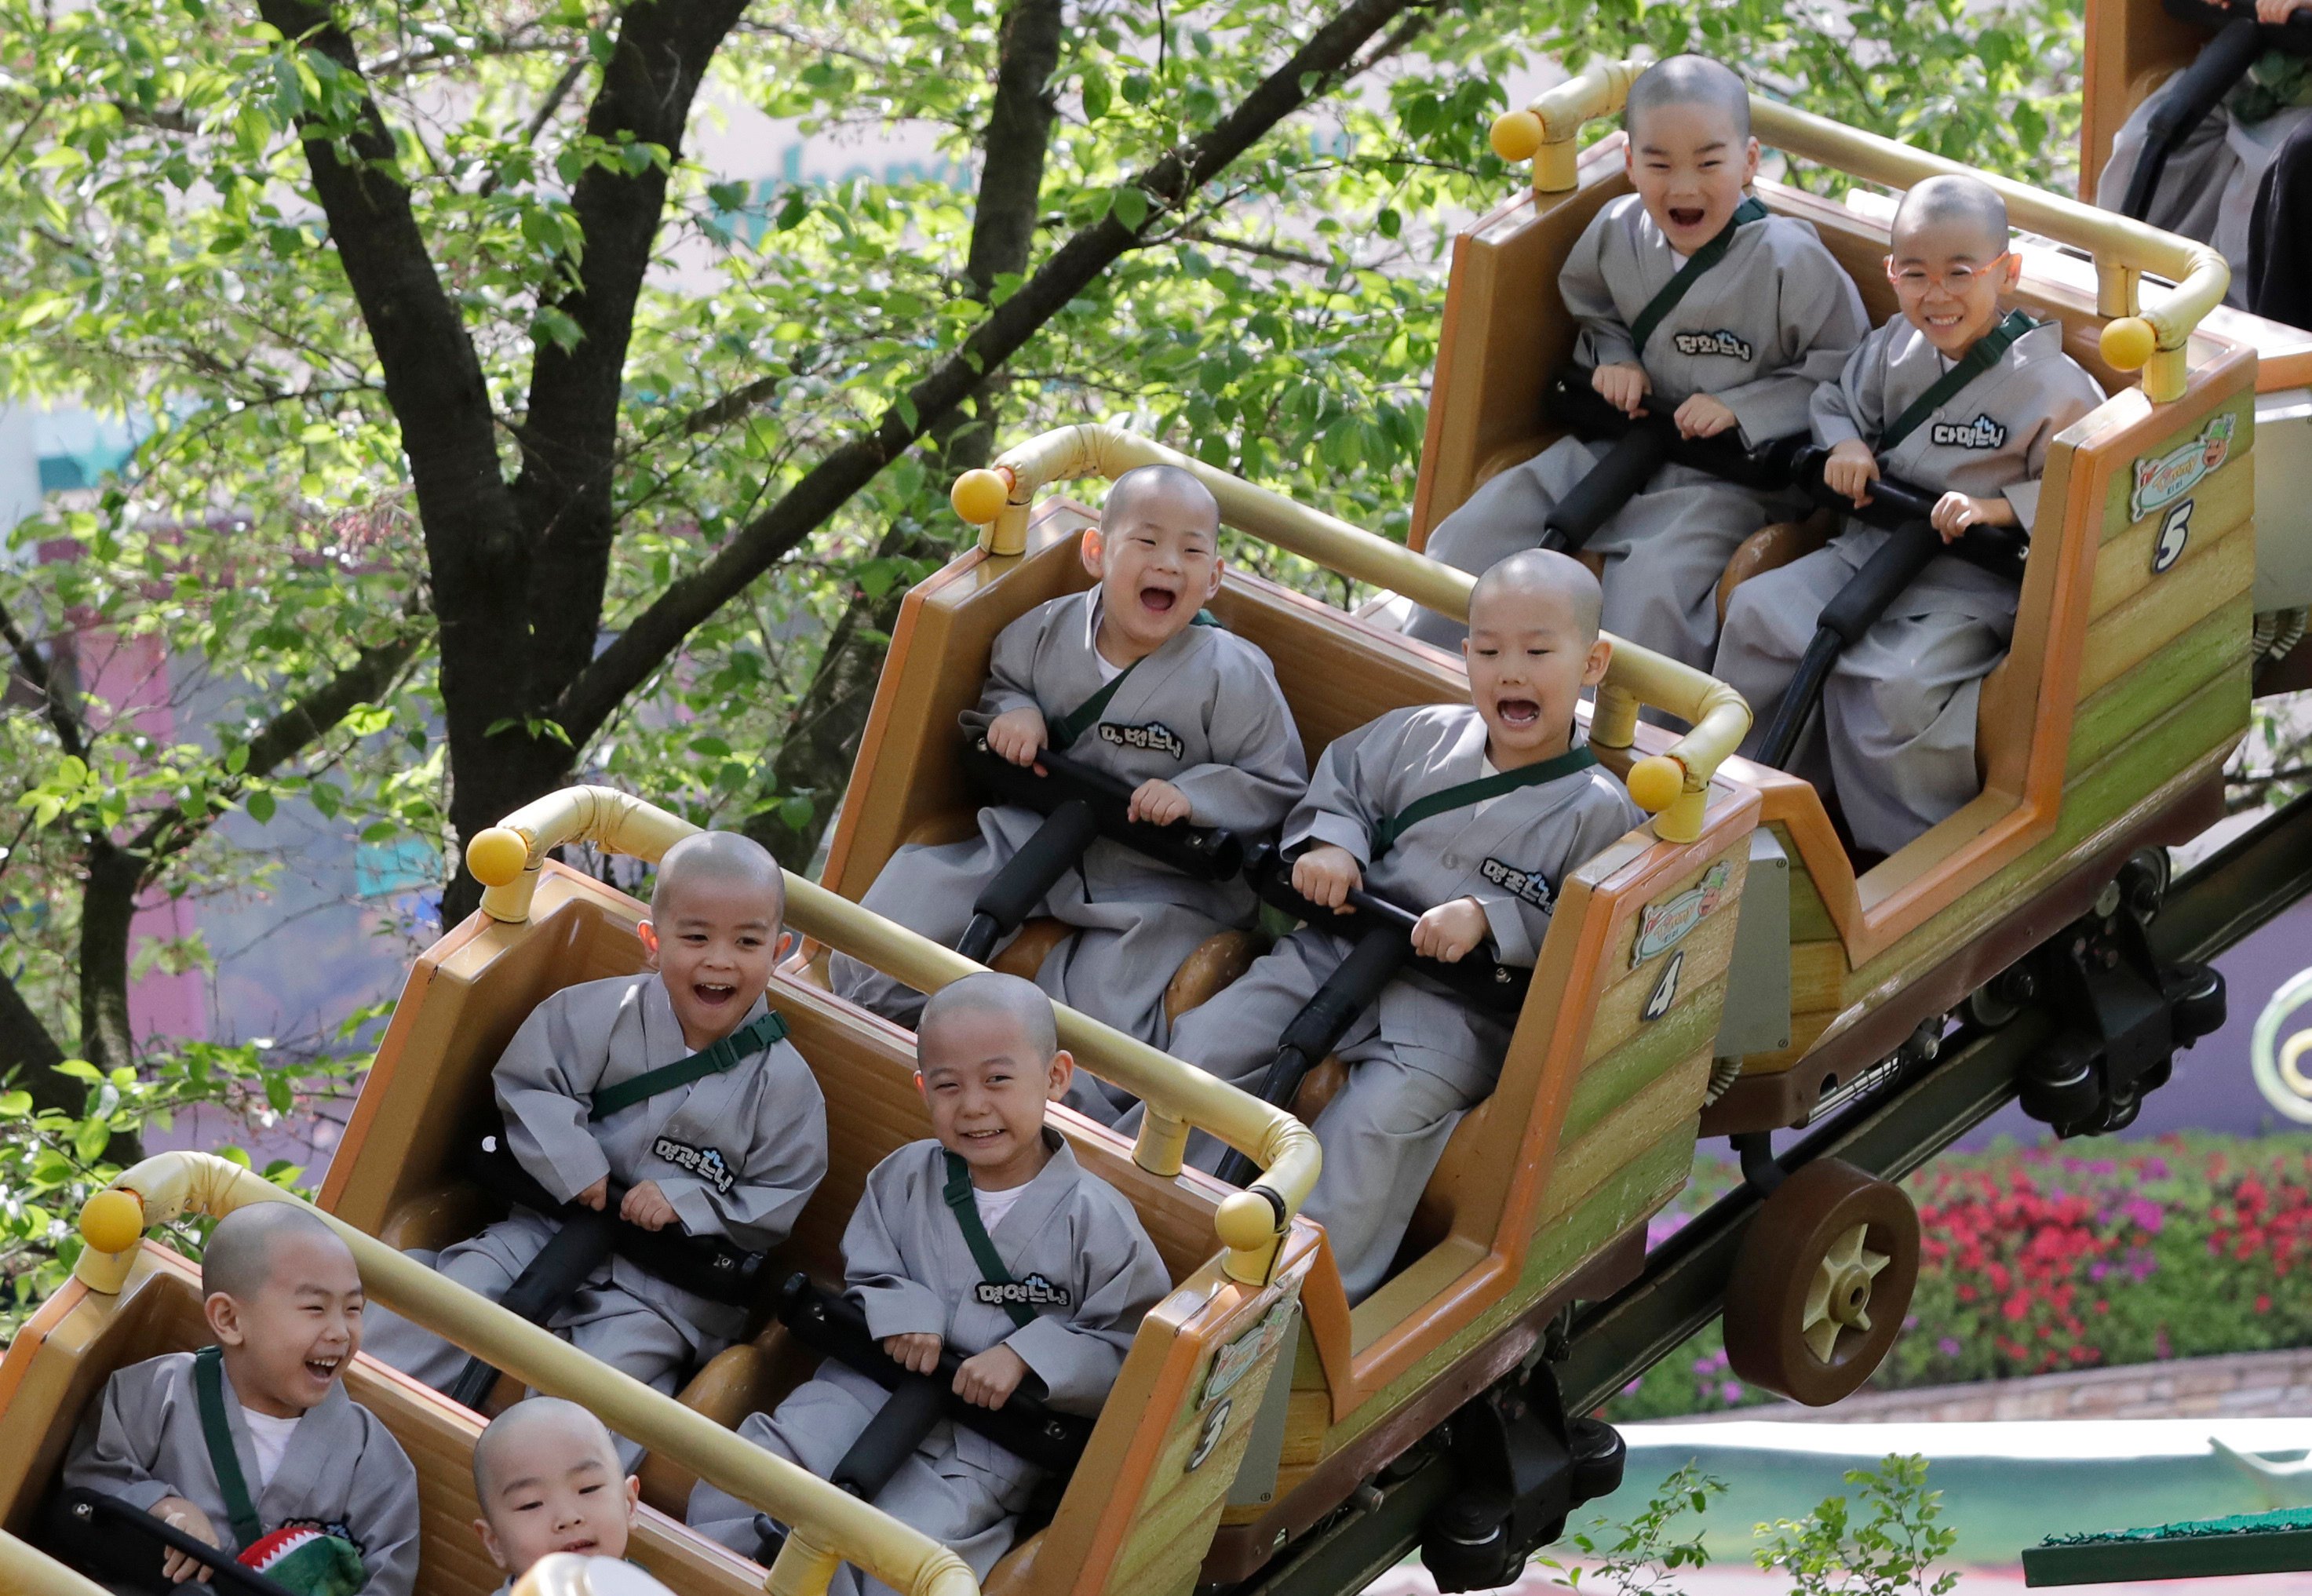 Children ride a roller coaster at an amusement park in Yongin, South Korea. Since 2018, the country has been the only OECD member to have a birth rate below 1. Photo: AP